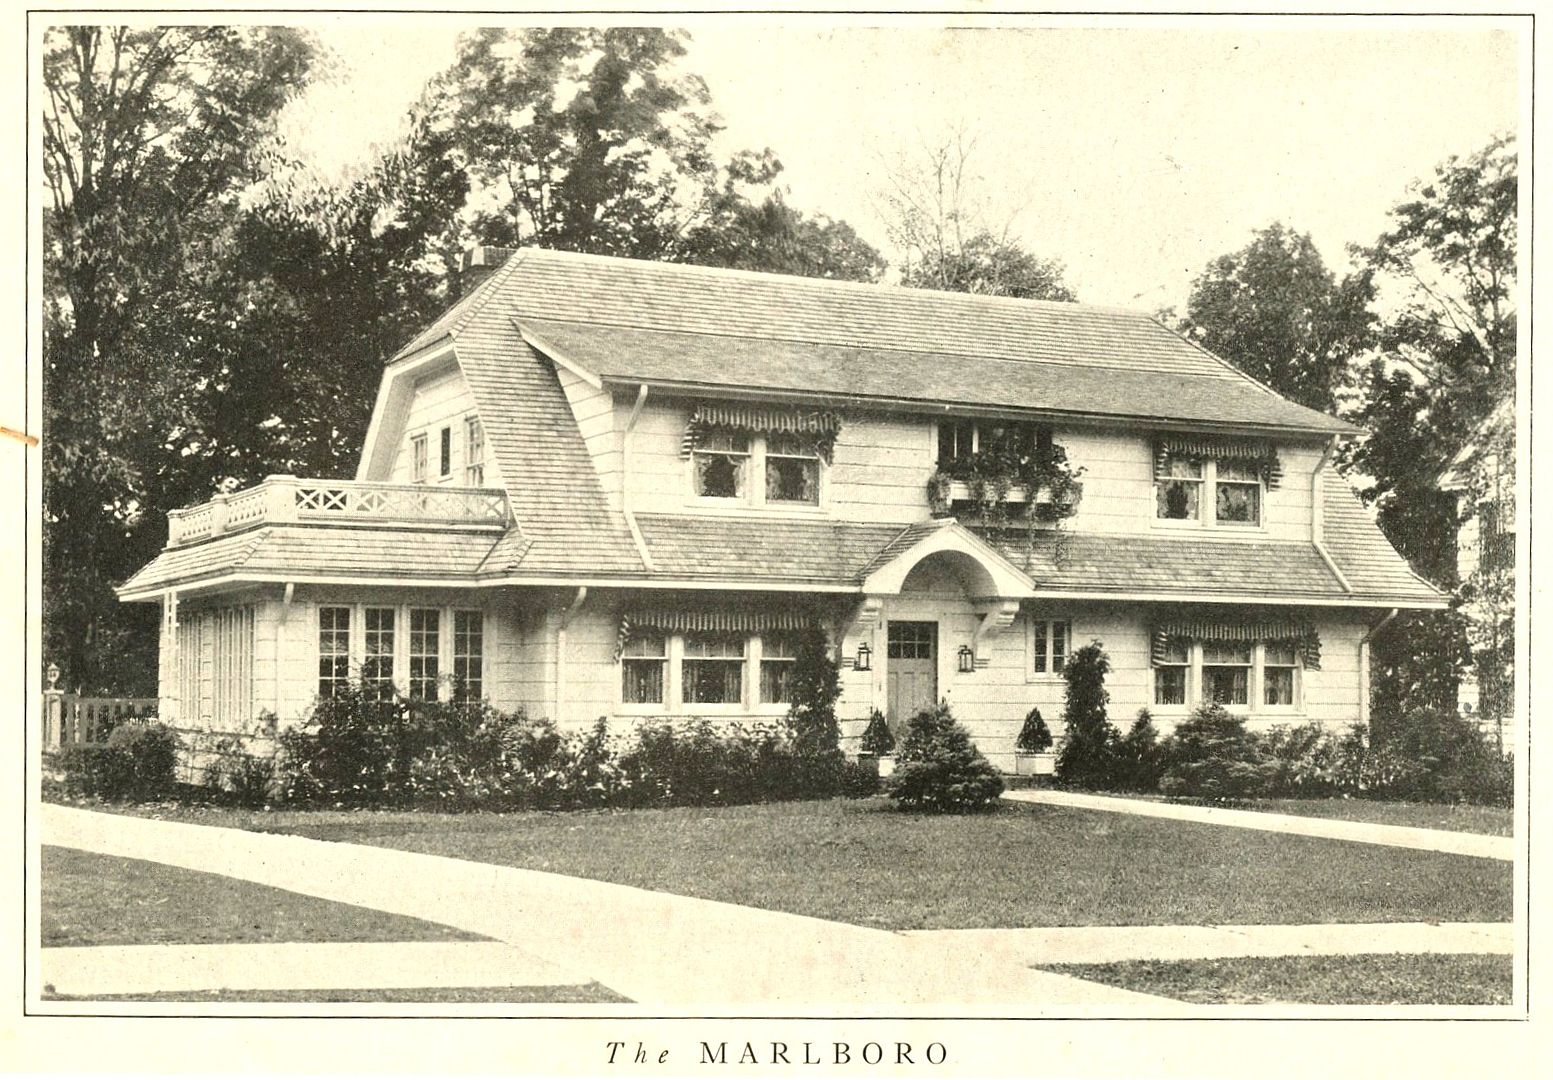 Even closer to my house in Waterview is this kit home, The Marlboro. This house is not a Sears House, but it was sold by another mail-order company known as Lewis Manufacturing. The Marlboro was their biggest model, and we have one on High Street in Waterview!  